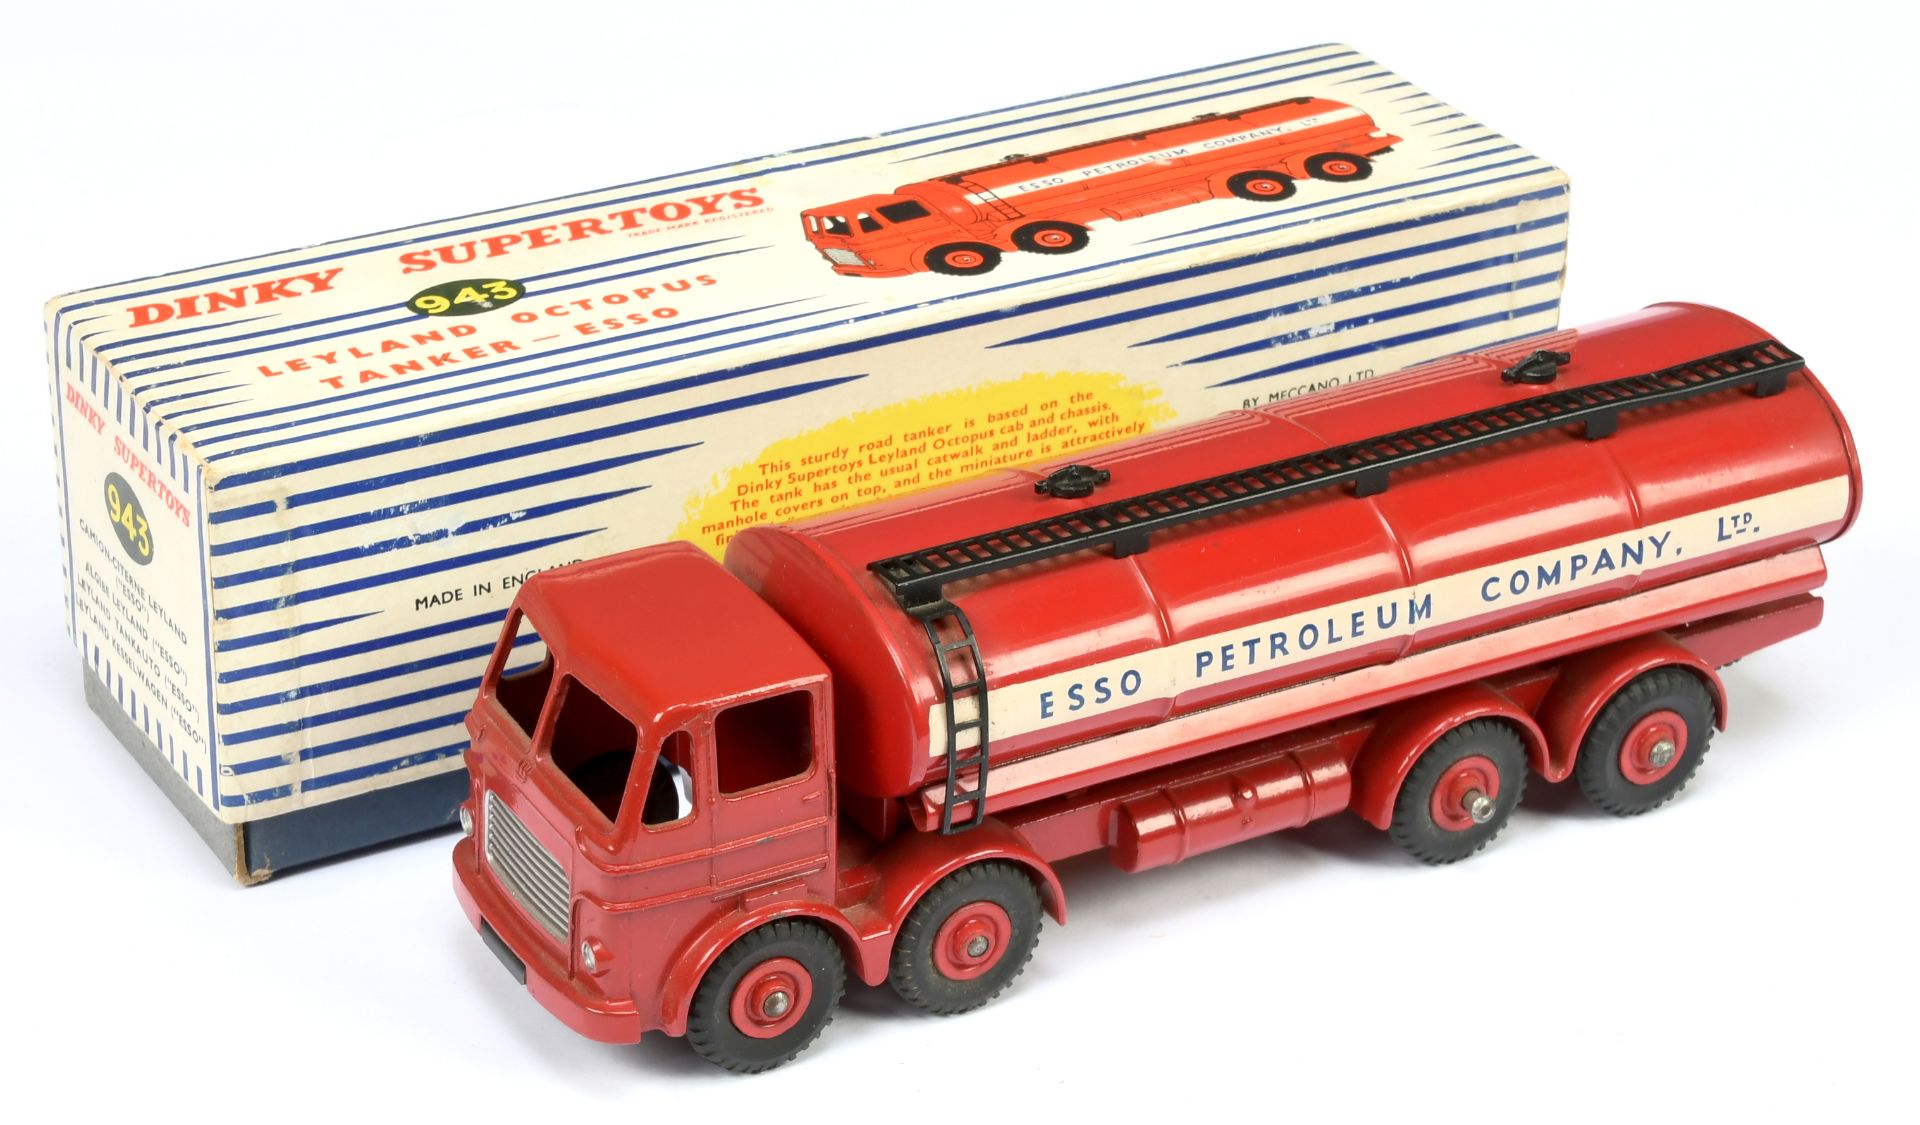 Dinky Toys 943 Leyland Octopus Tanker "ESSO Petroleum Company LTD" - Red including Cab, chassis, ...